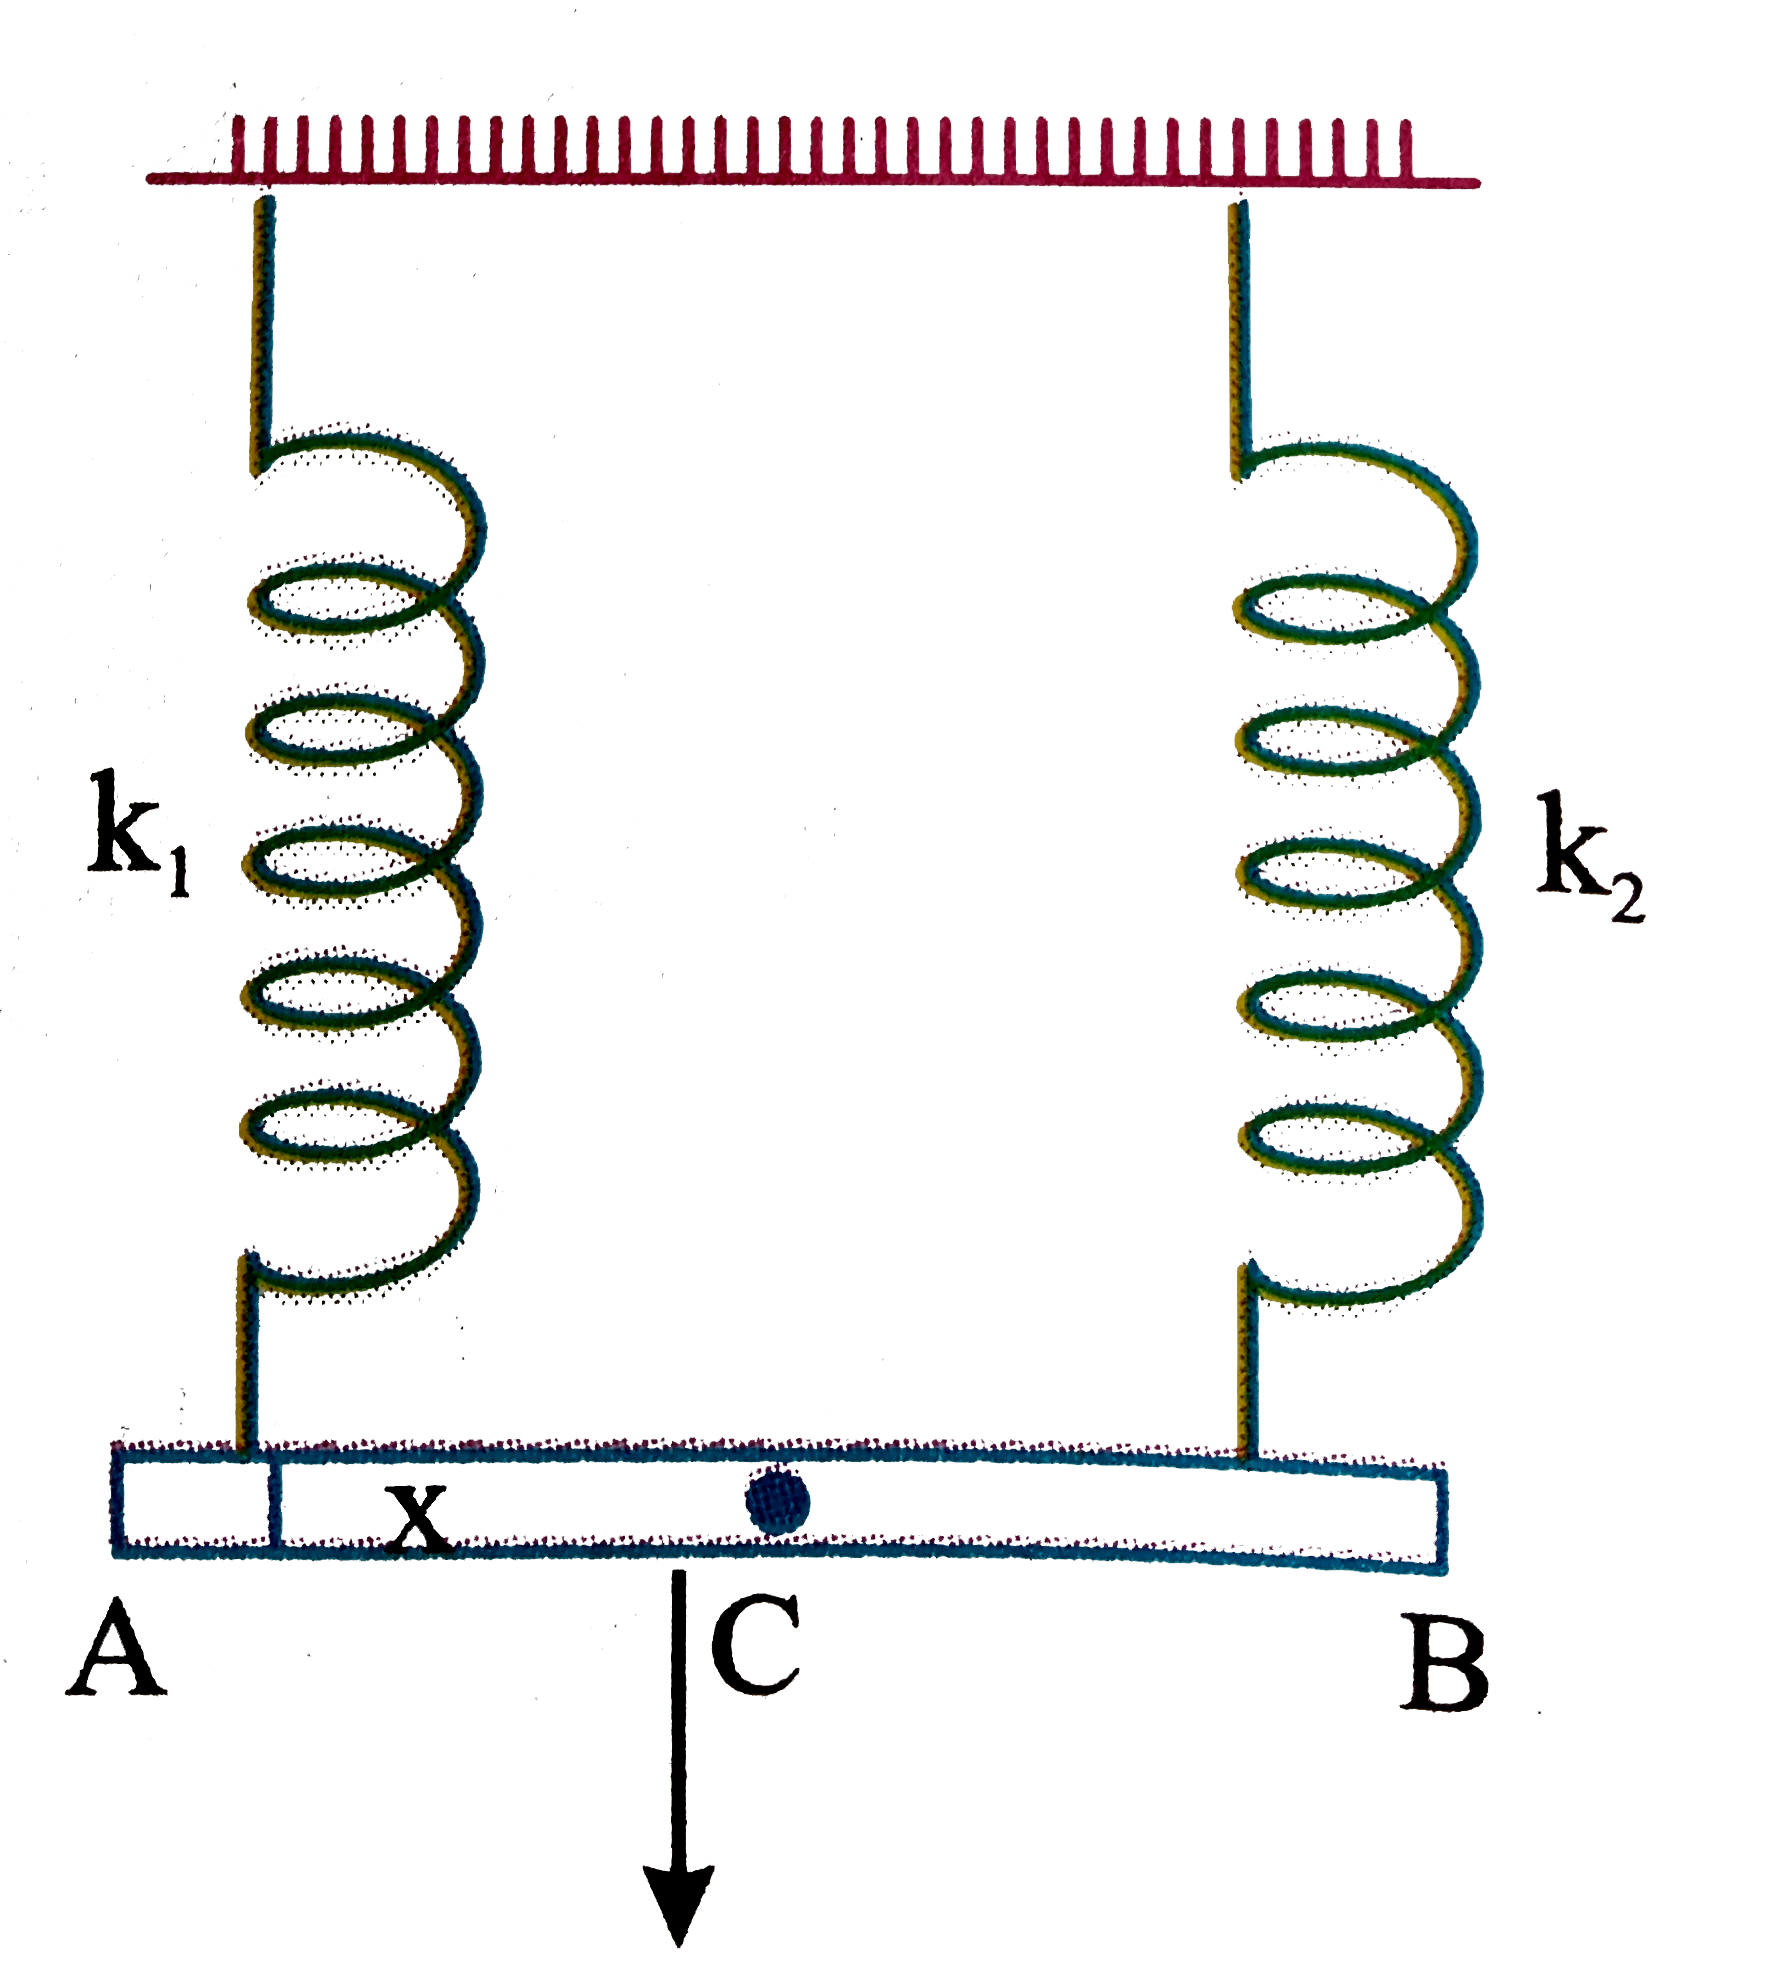 Two light vertical springs with equal natural length and spring constants k(1) and k(2) are separated by a distance l. Their upper end the ends A and B of a light horizontal rod AB. A vertical downwards force F is applied at point C on the rod. AB will remain horizontal in equilibrium if the distance AC is